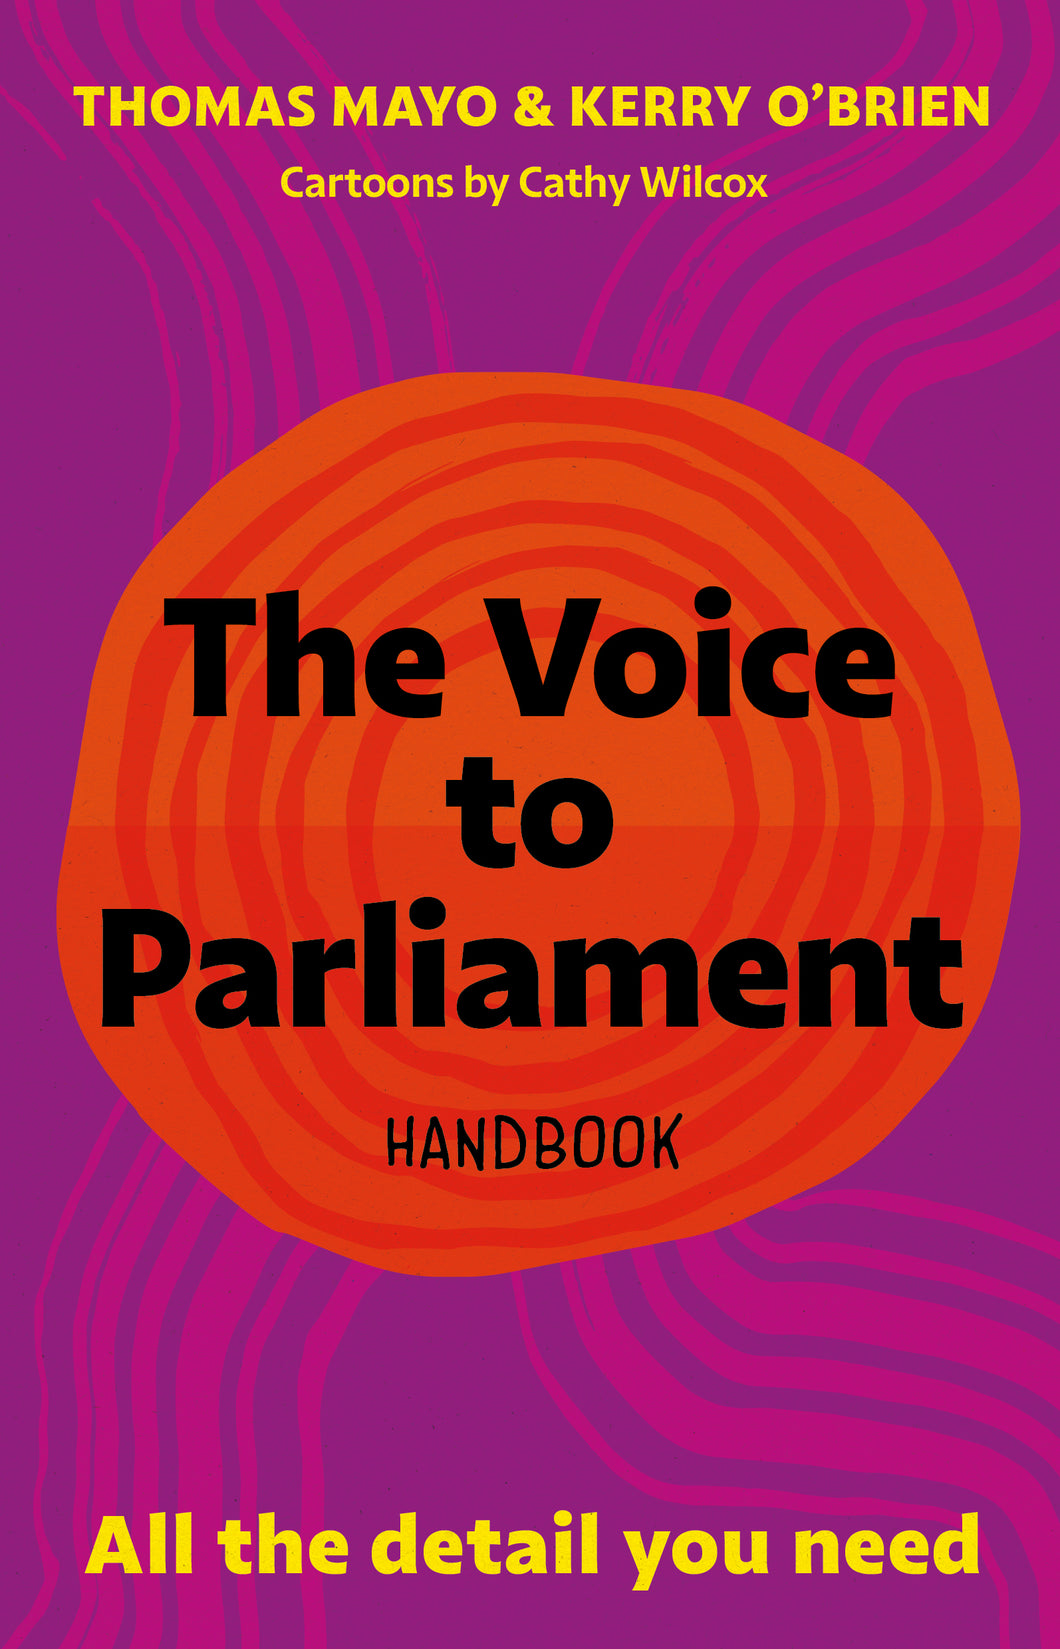 The Voice to Parliament by Thomas Mayo and Kerry O'Brien